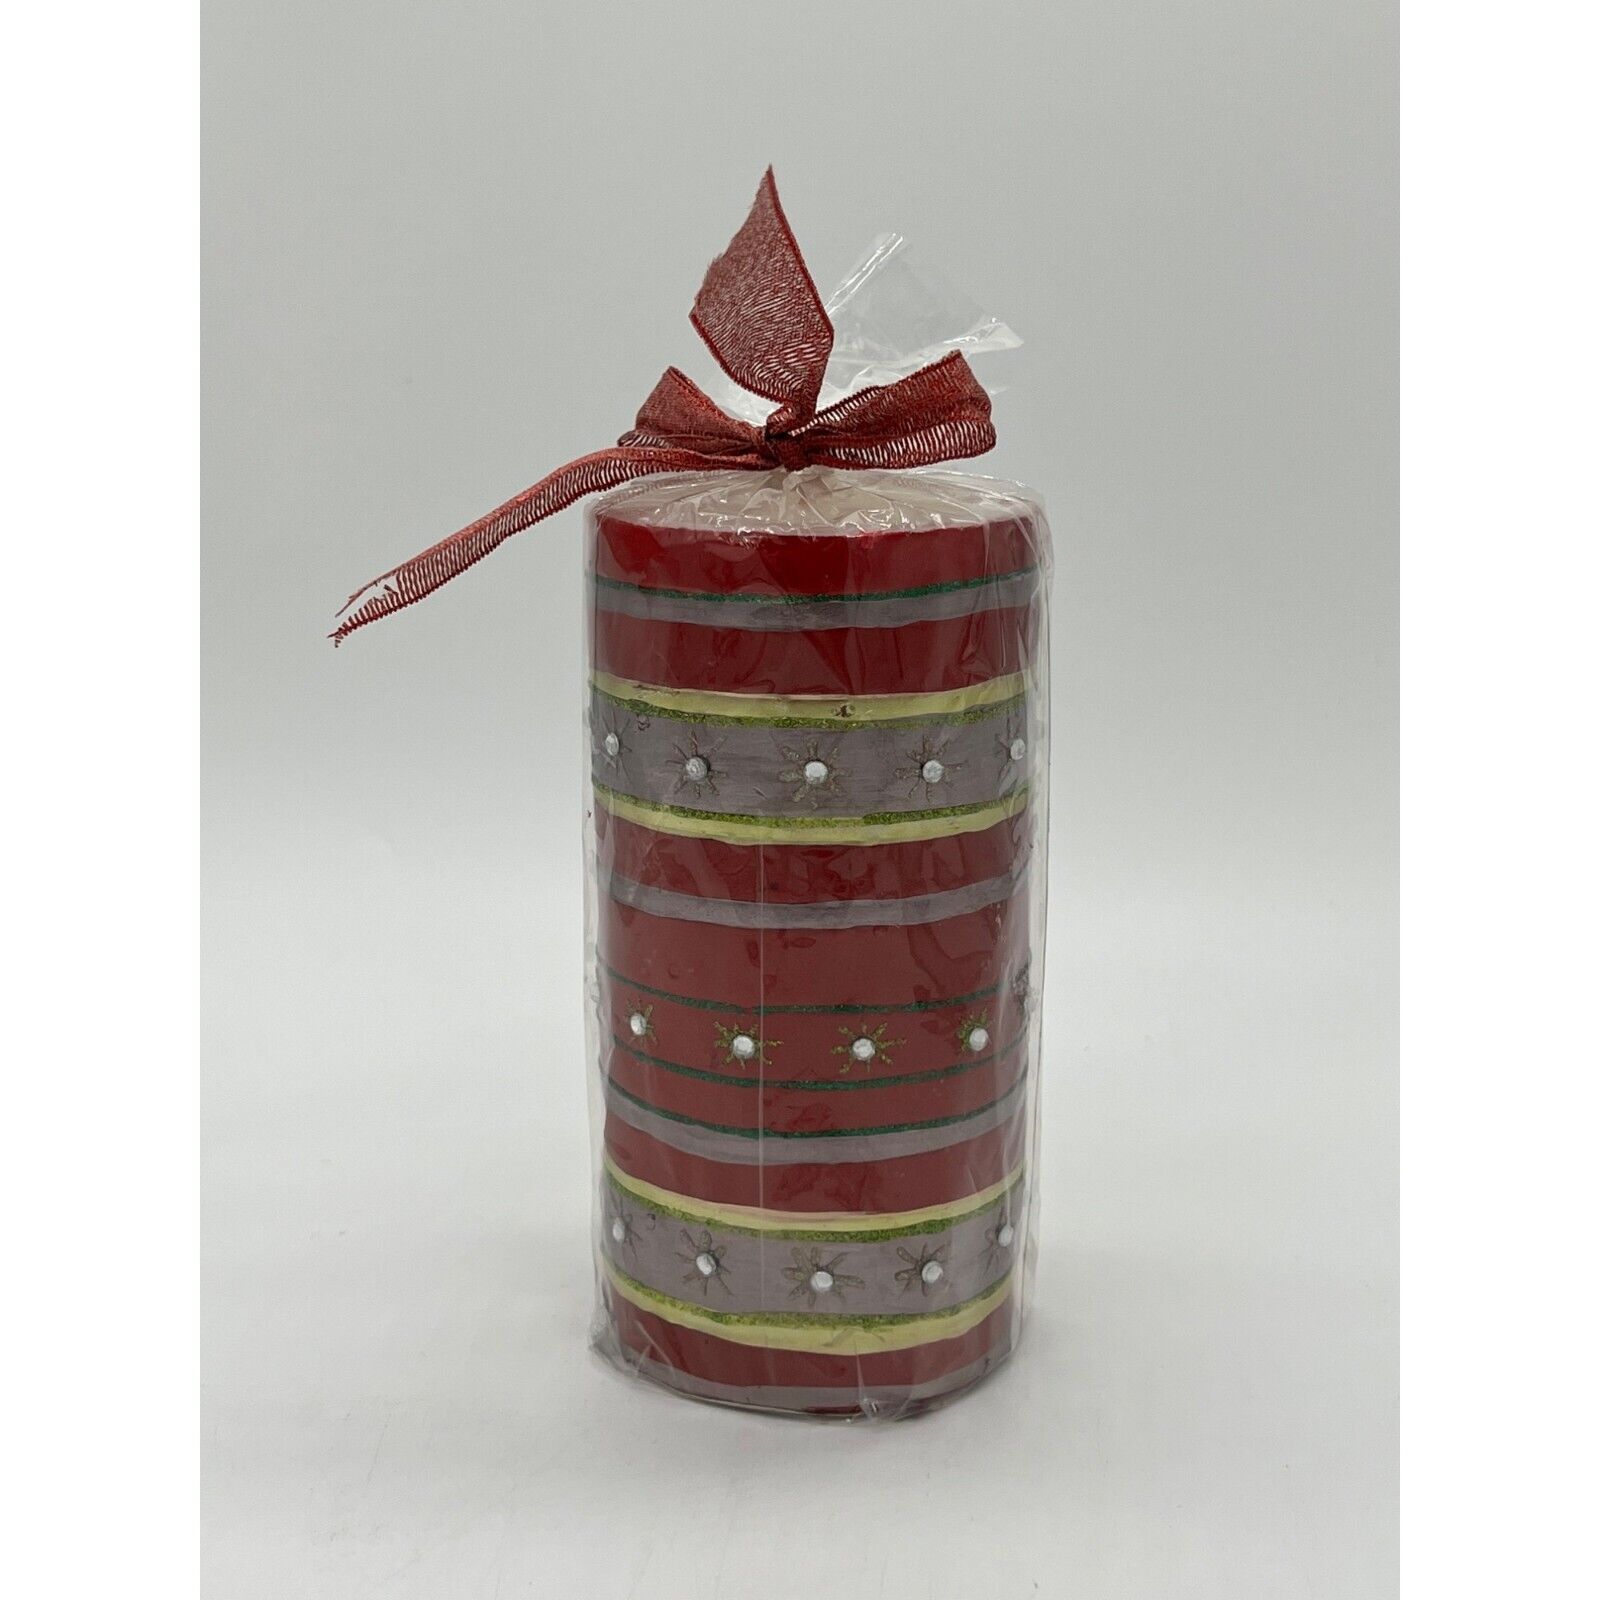 Beautiful Striped Red, Gold and Silver Christmas Candle w/ Jewels by Living Quar